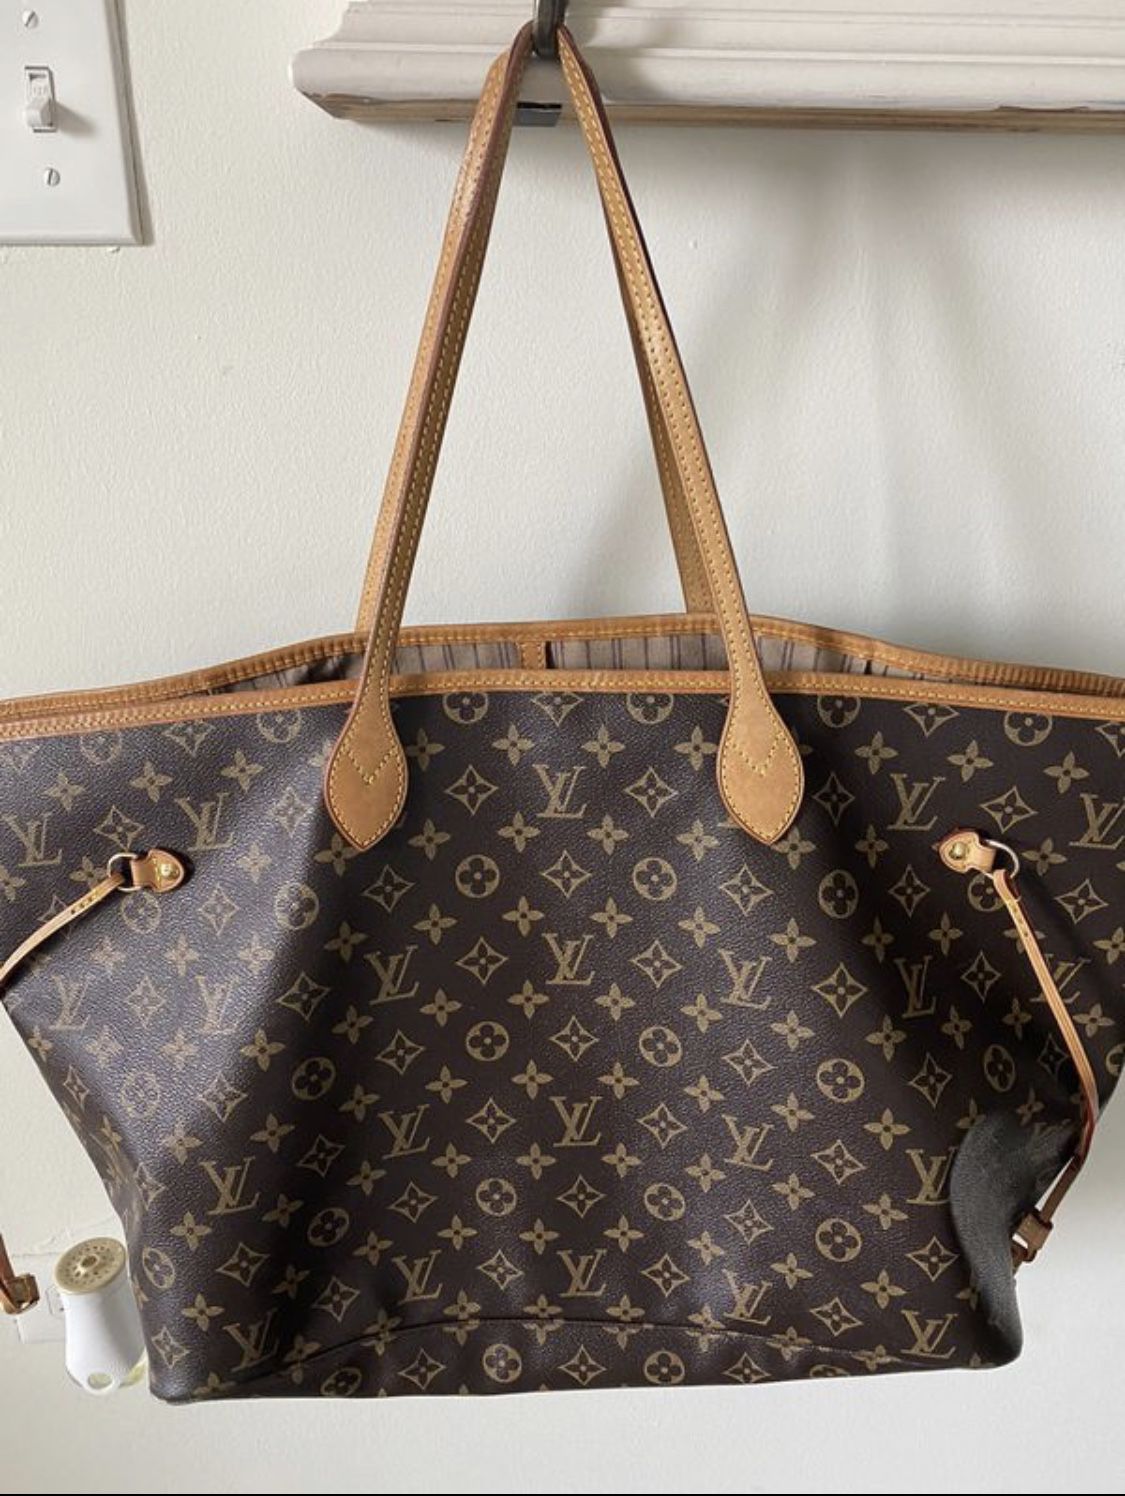 Authentic Louis Vuitton Neverfull GM